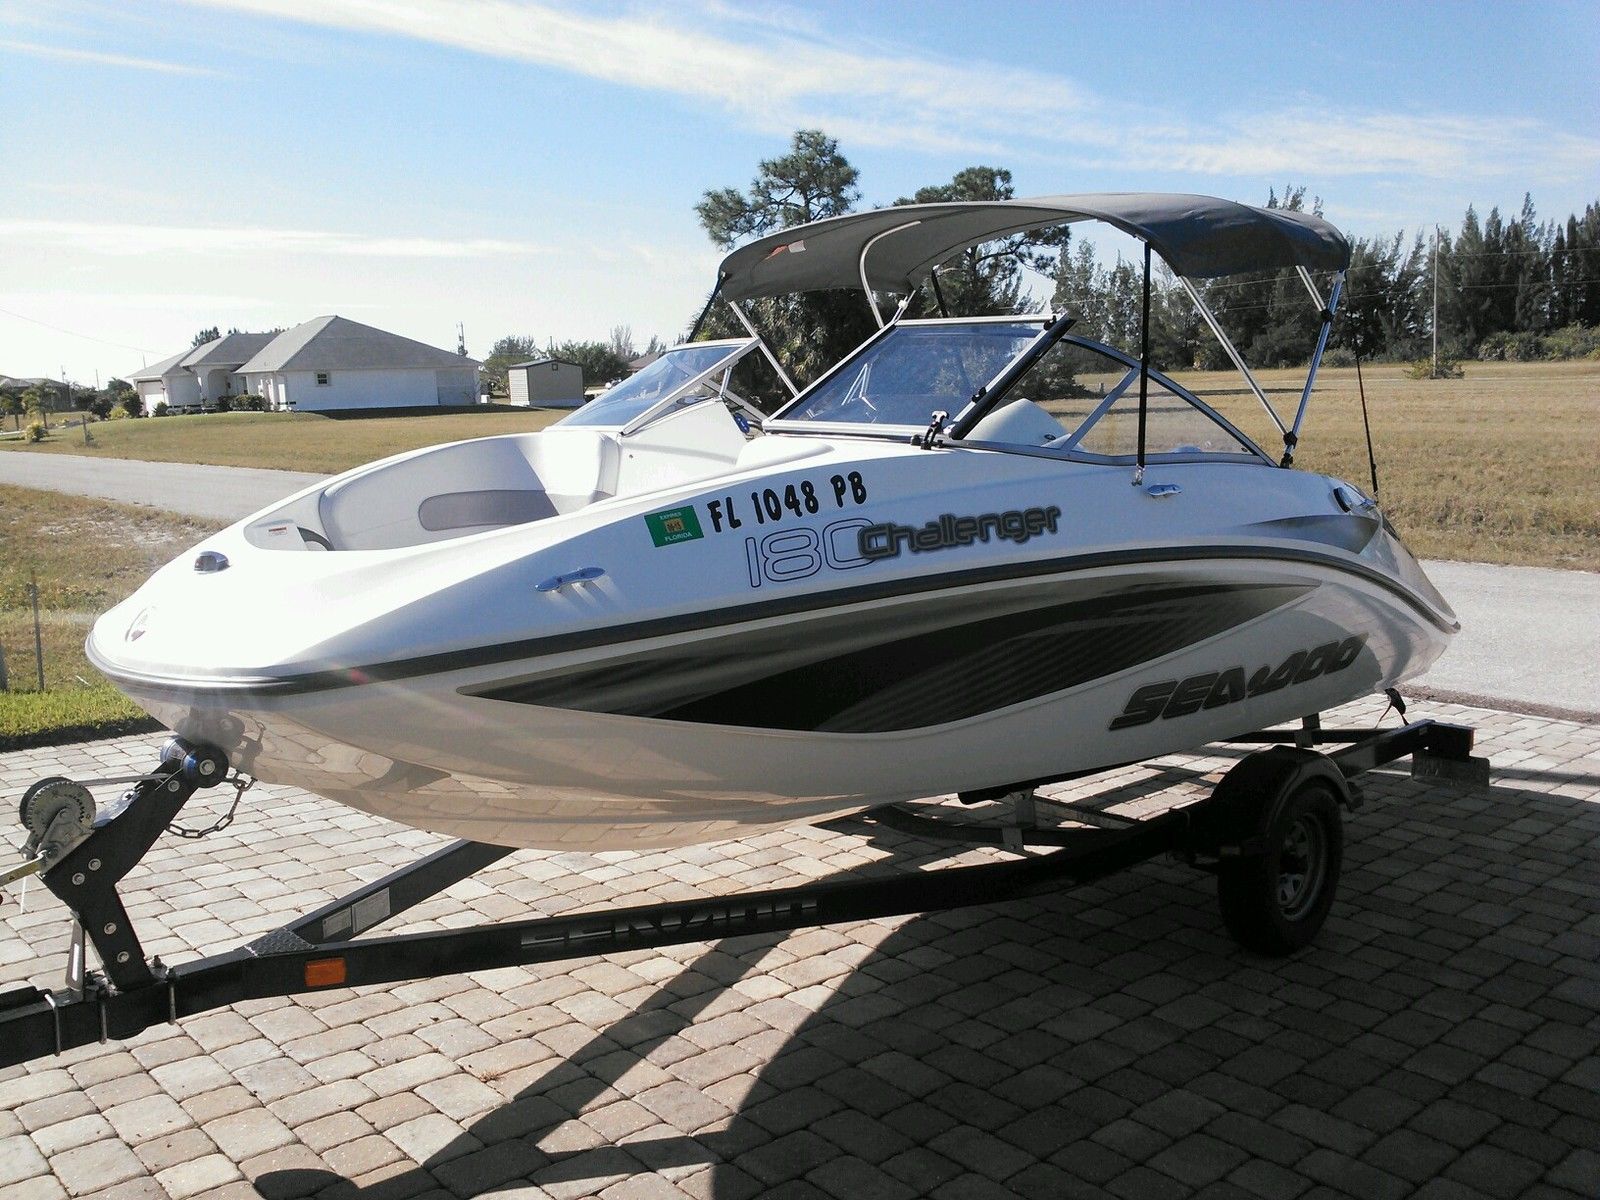 Sea Doo 2008 for sale for $13,900 - Boats-from-USA.com